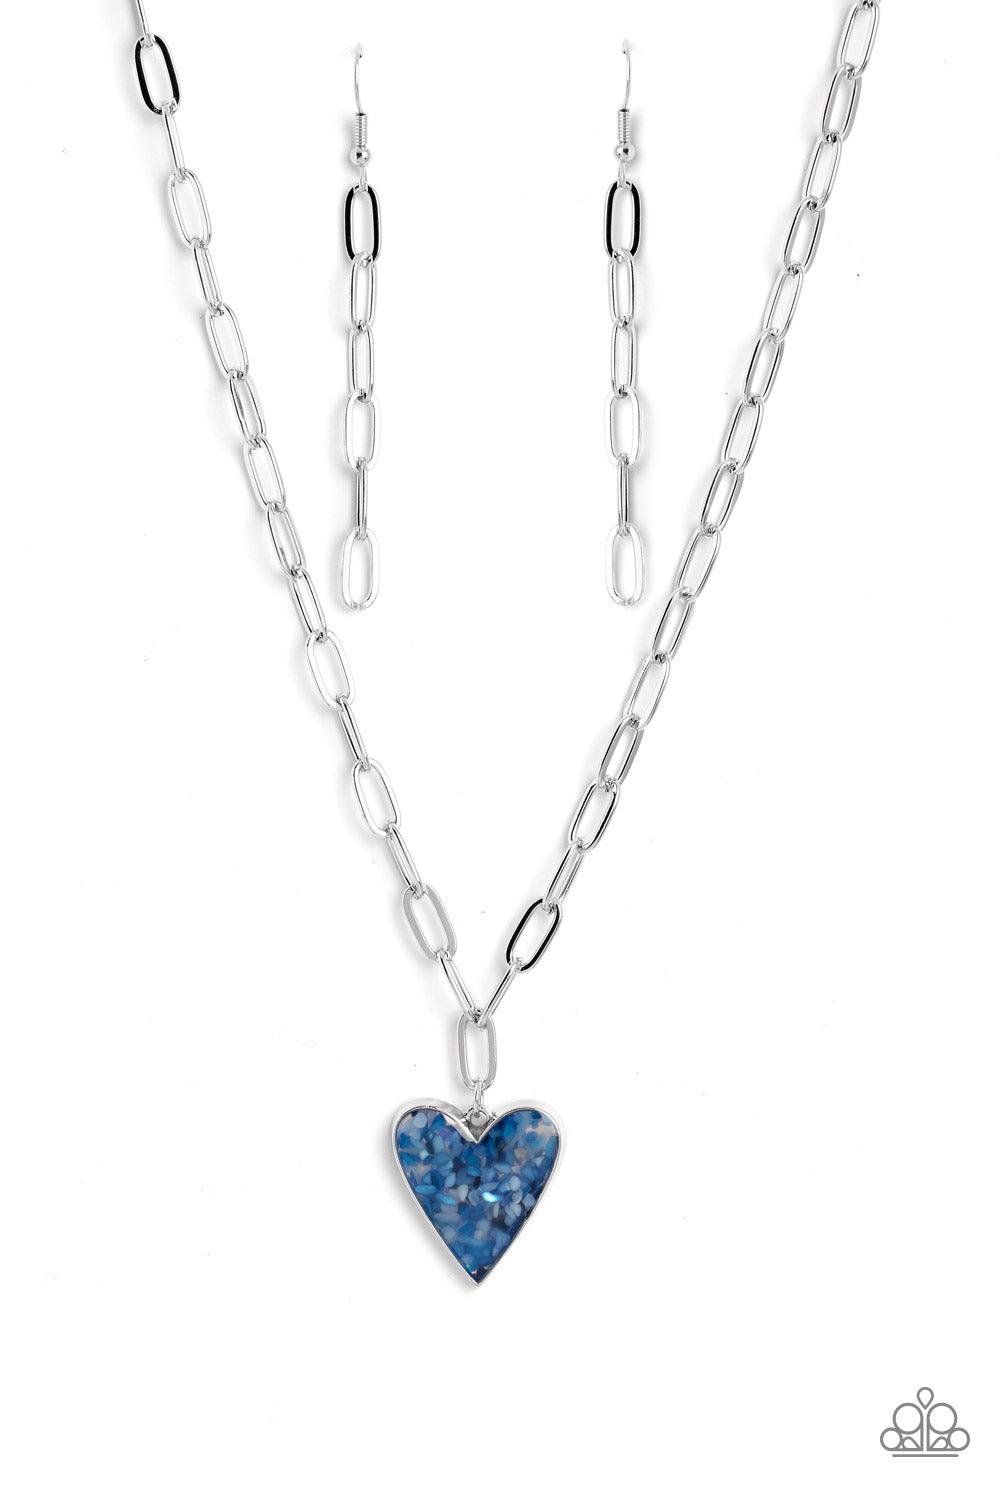 Kiss and SHELL Blue Heart Necklace - Paparazzi Accessories- lightbox - CarasShop.com - $5 Jewelry by Cara Jewels